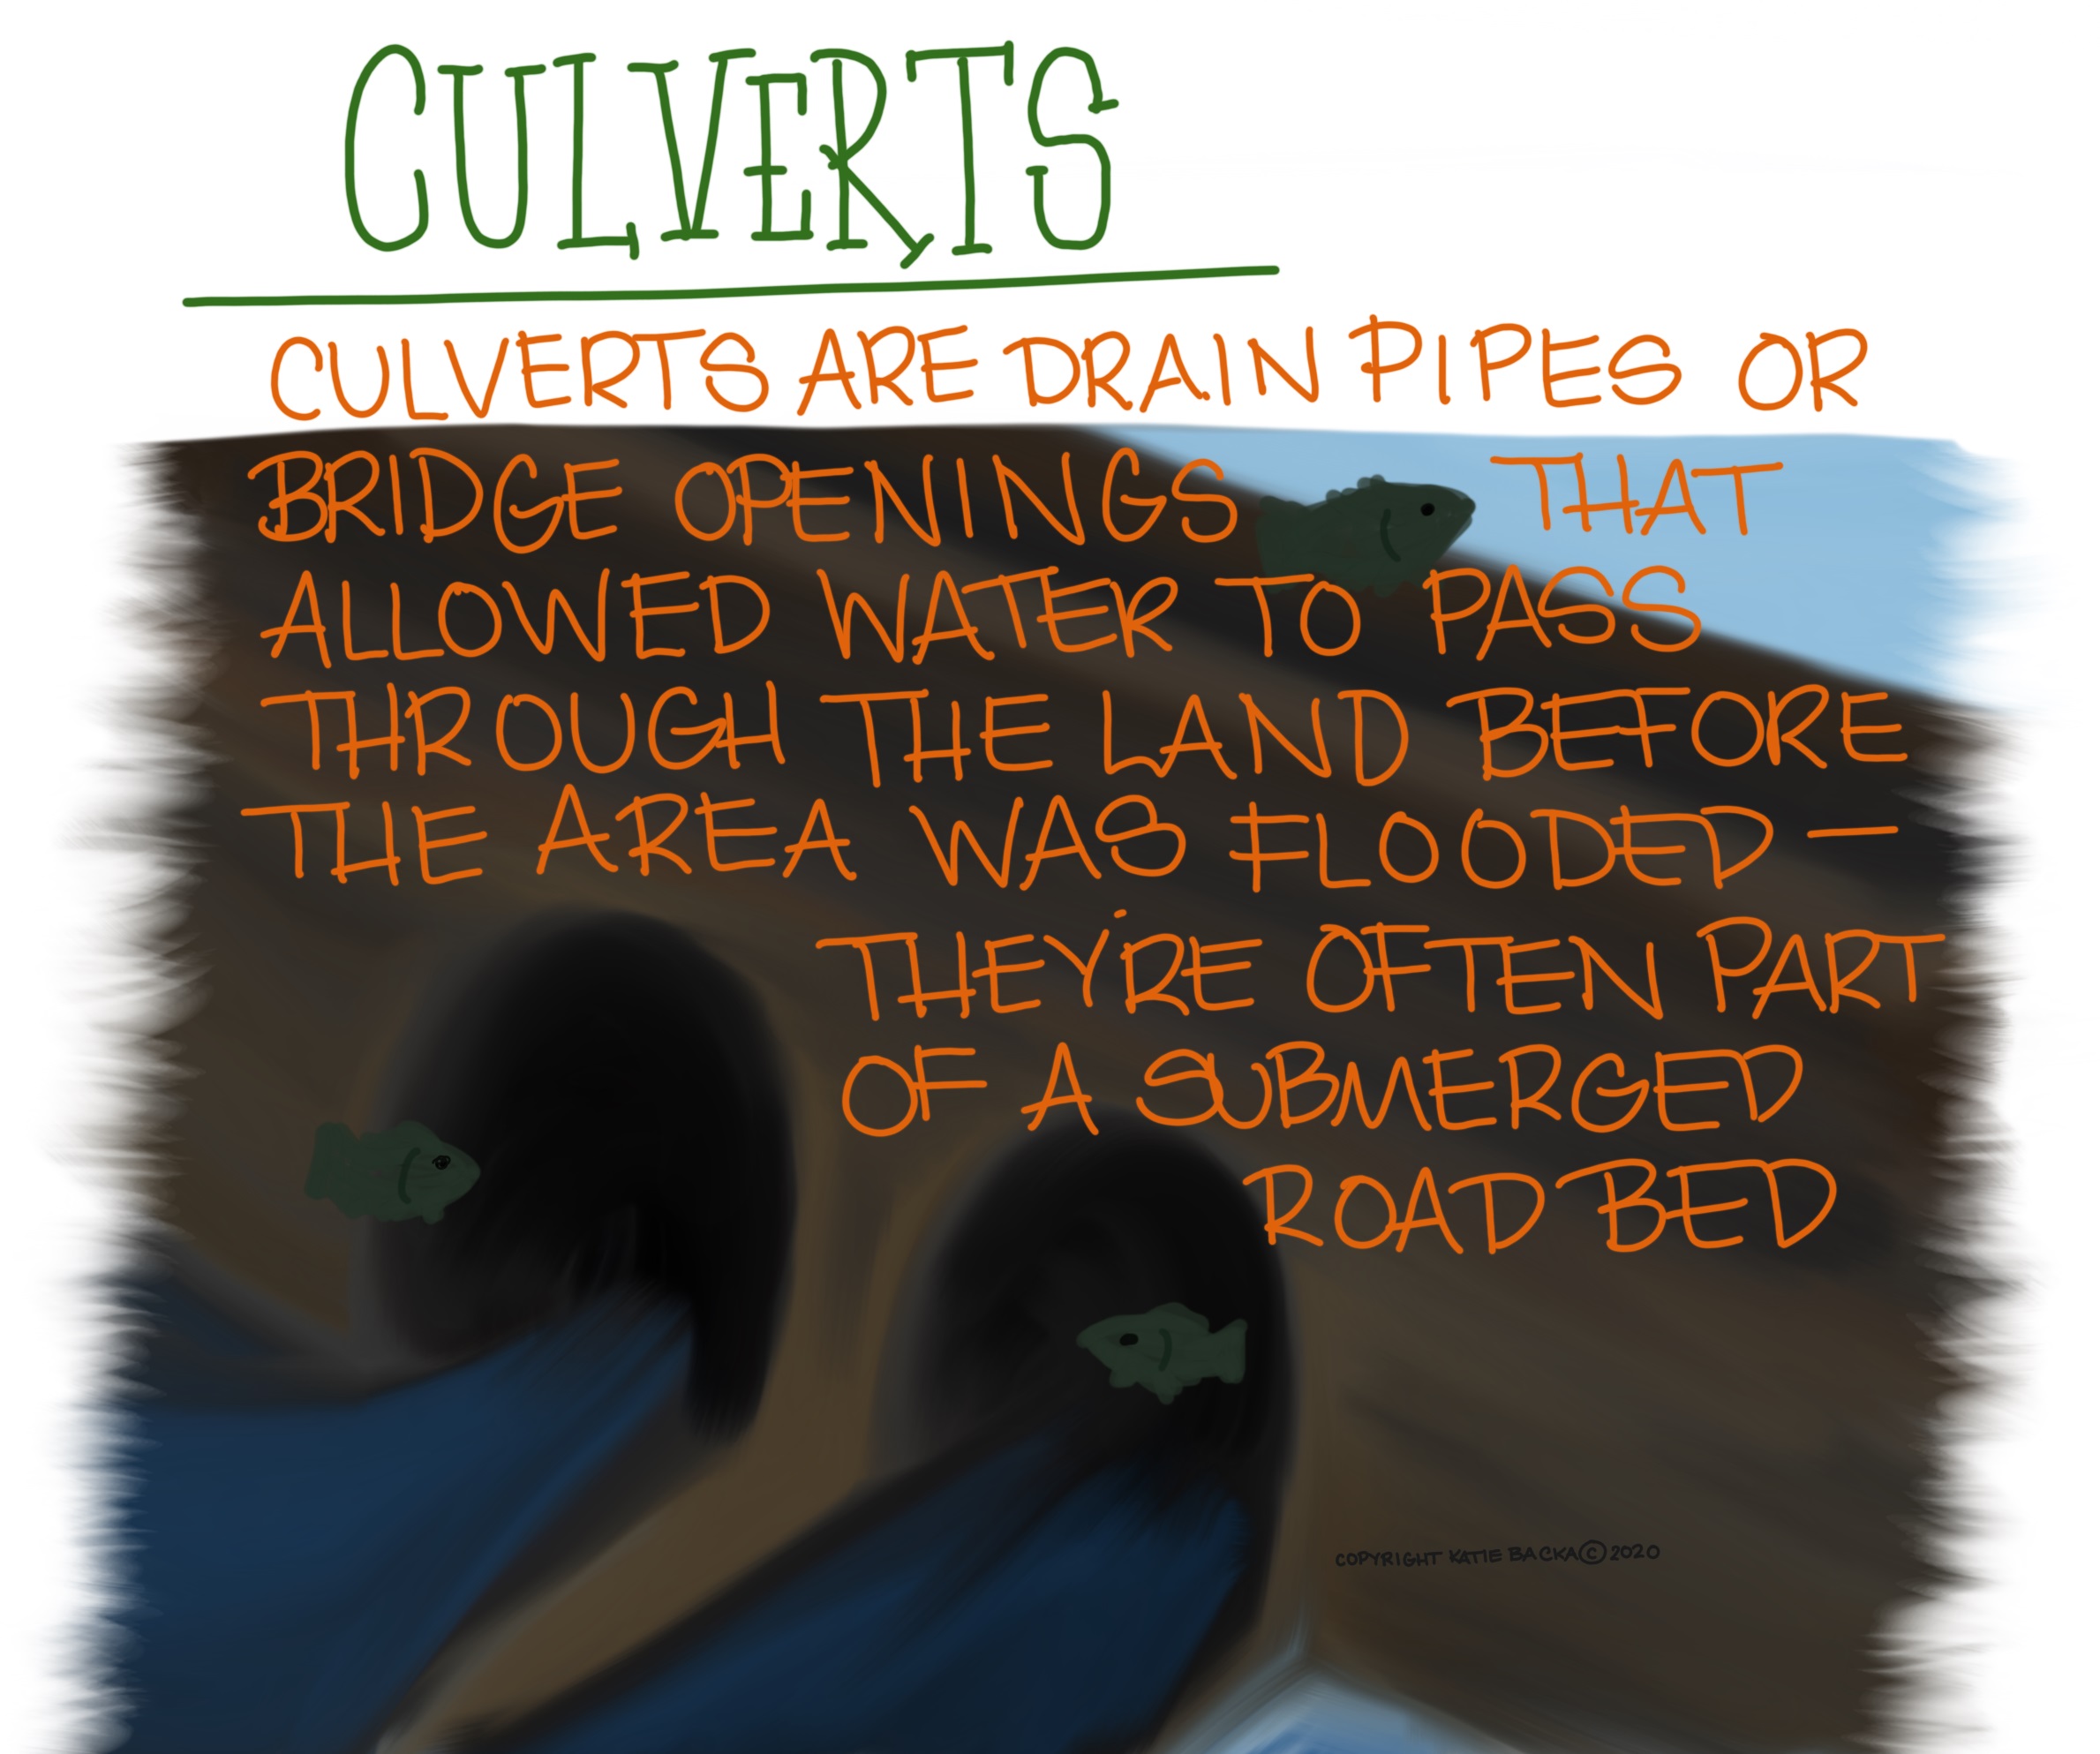 Script: Culverts - culverts are drain pipes or bridge openings that allowed water to pass through the land before the area was flooded - they're often part of a submerged road bed